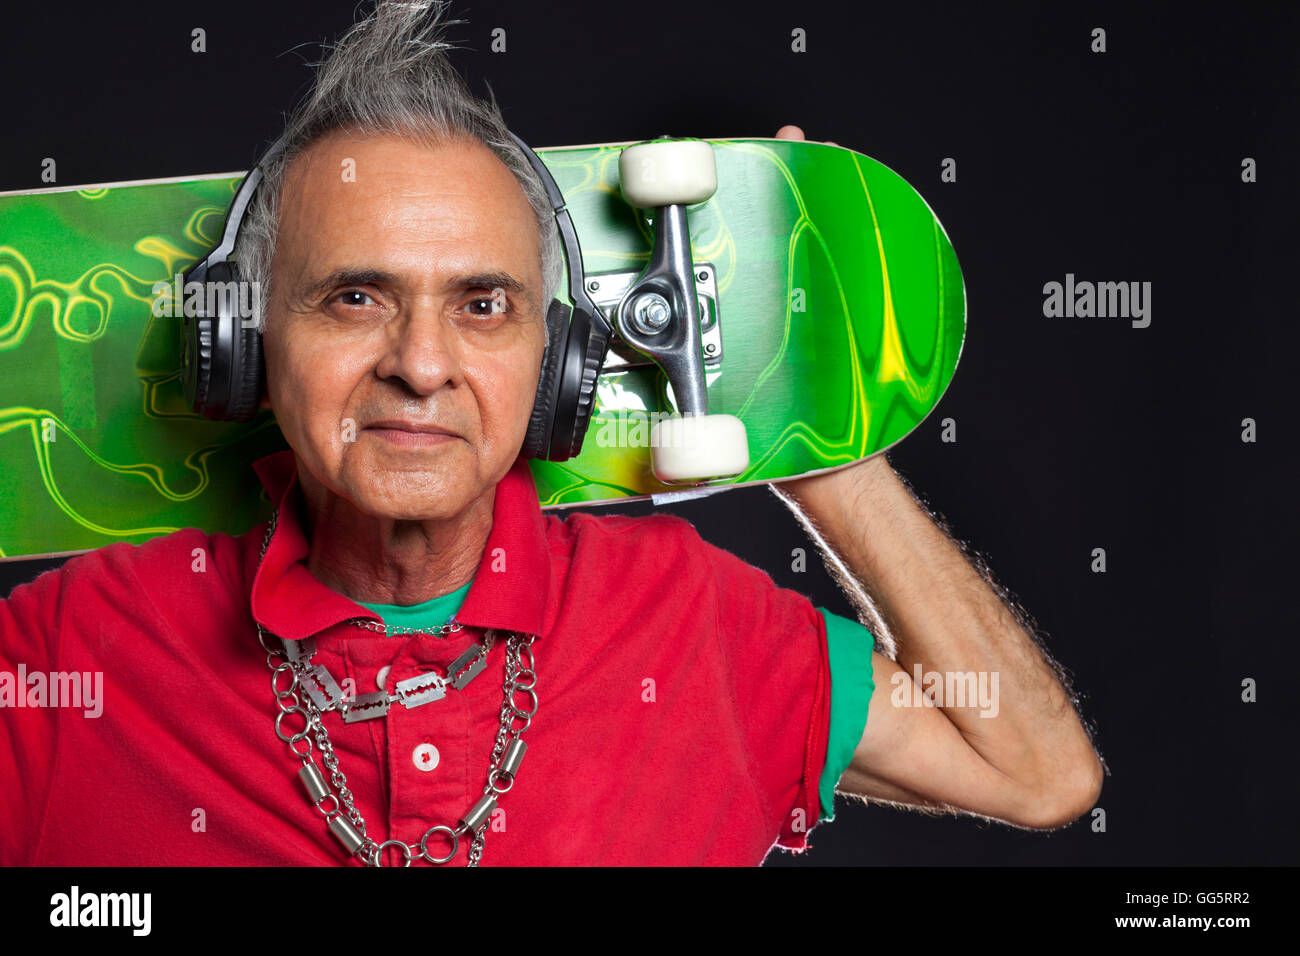 Close-up portrait of old man with skateboard Banque D'Images